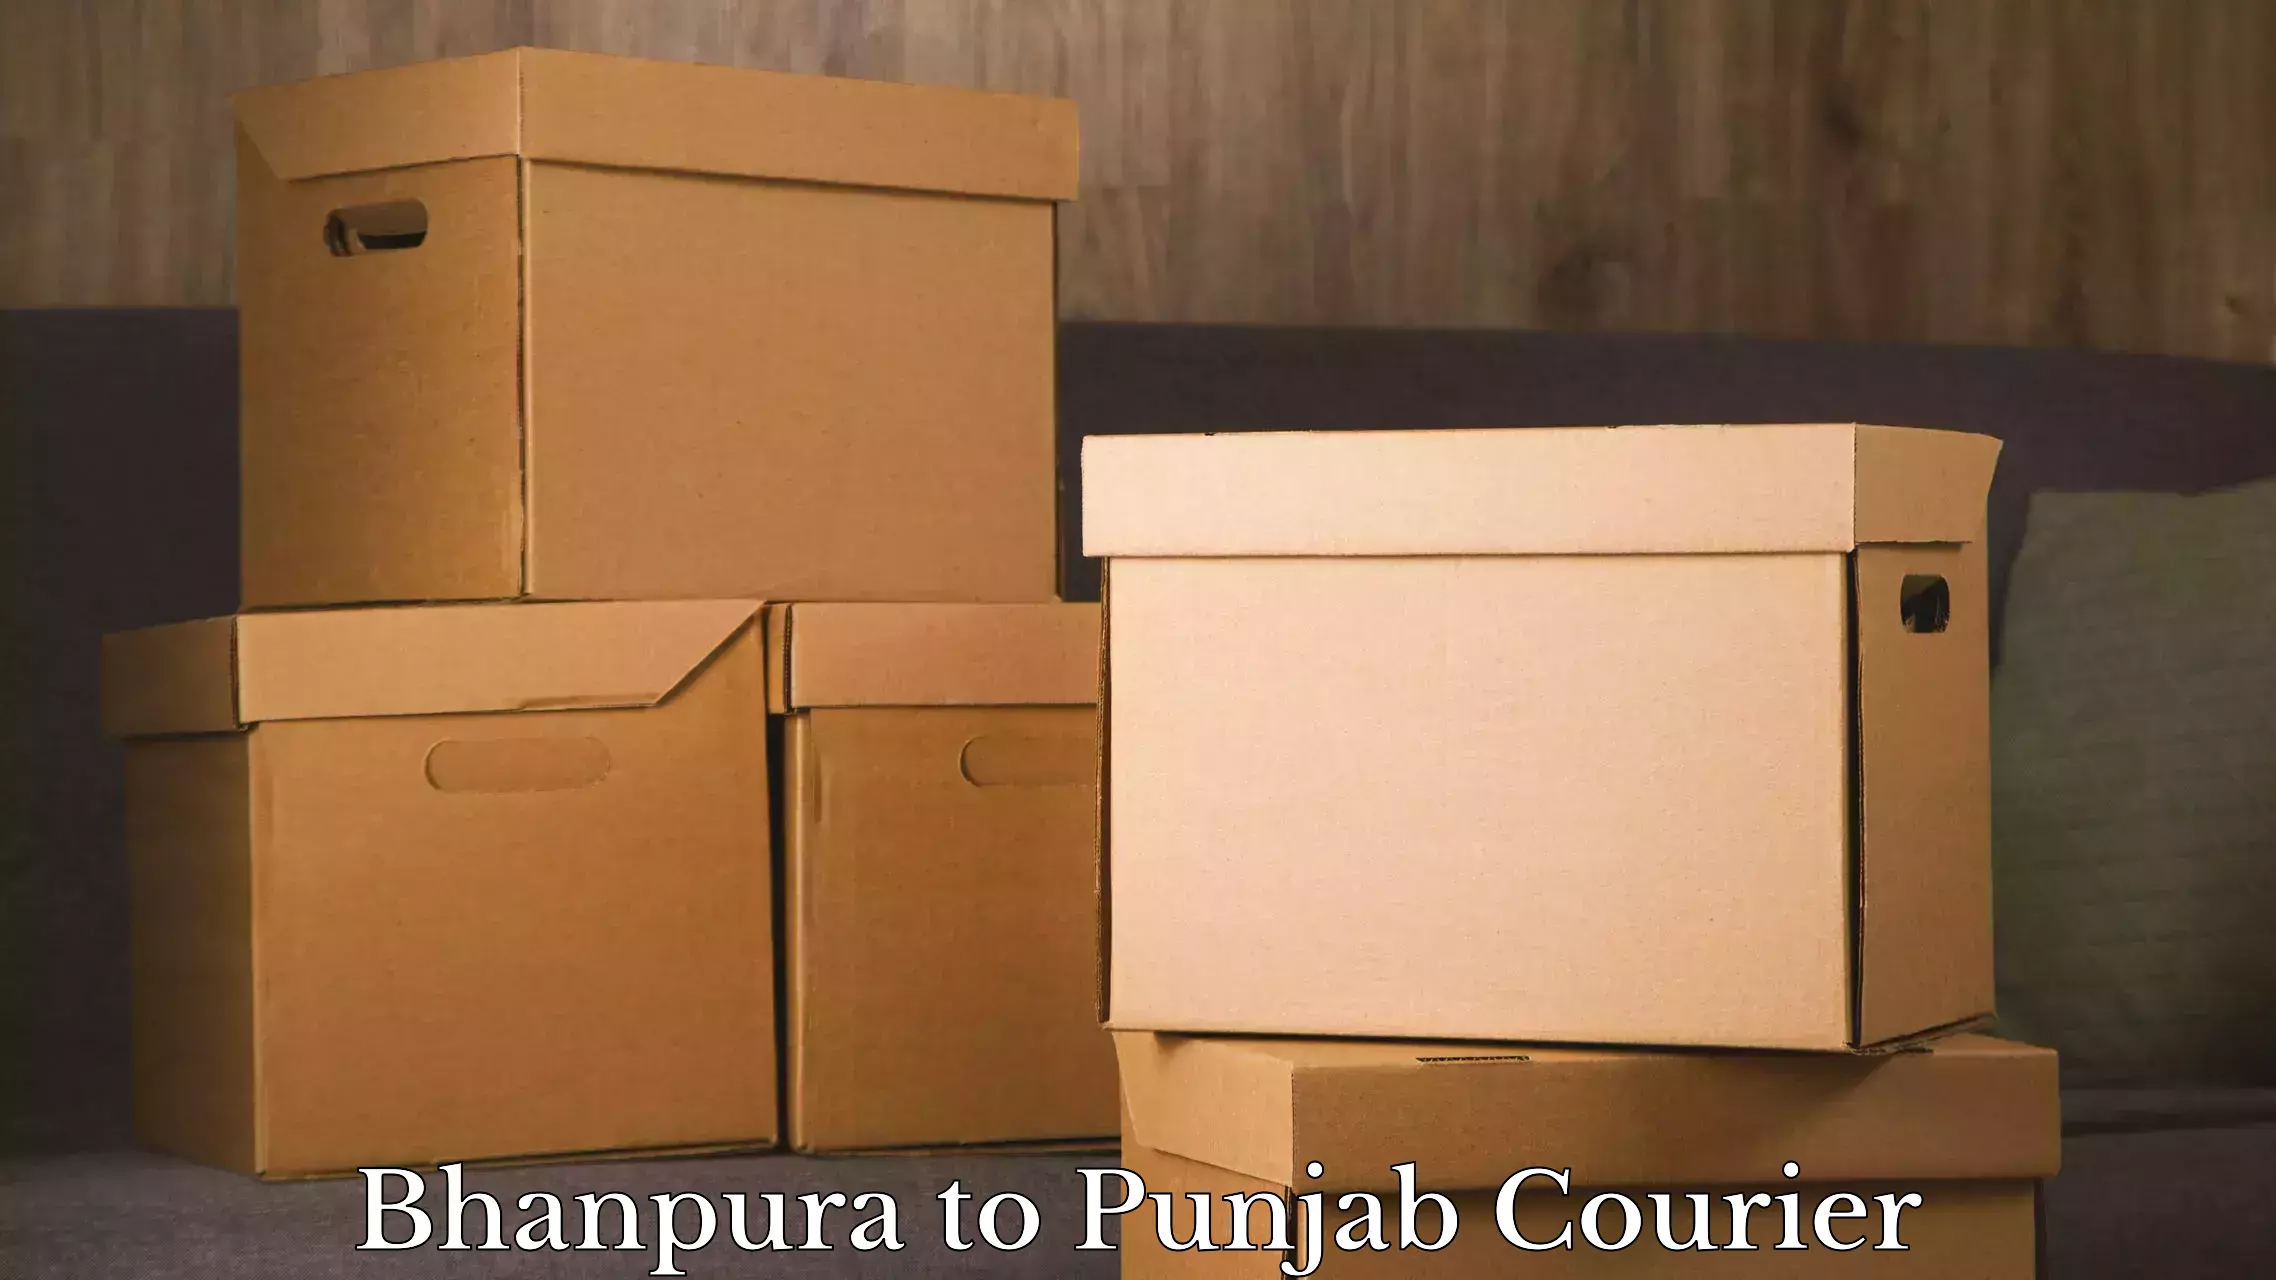 Luggage delivery providers Bhanpura to Punjab